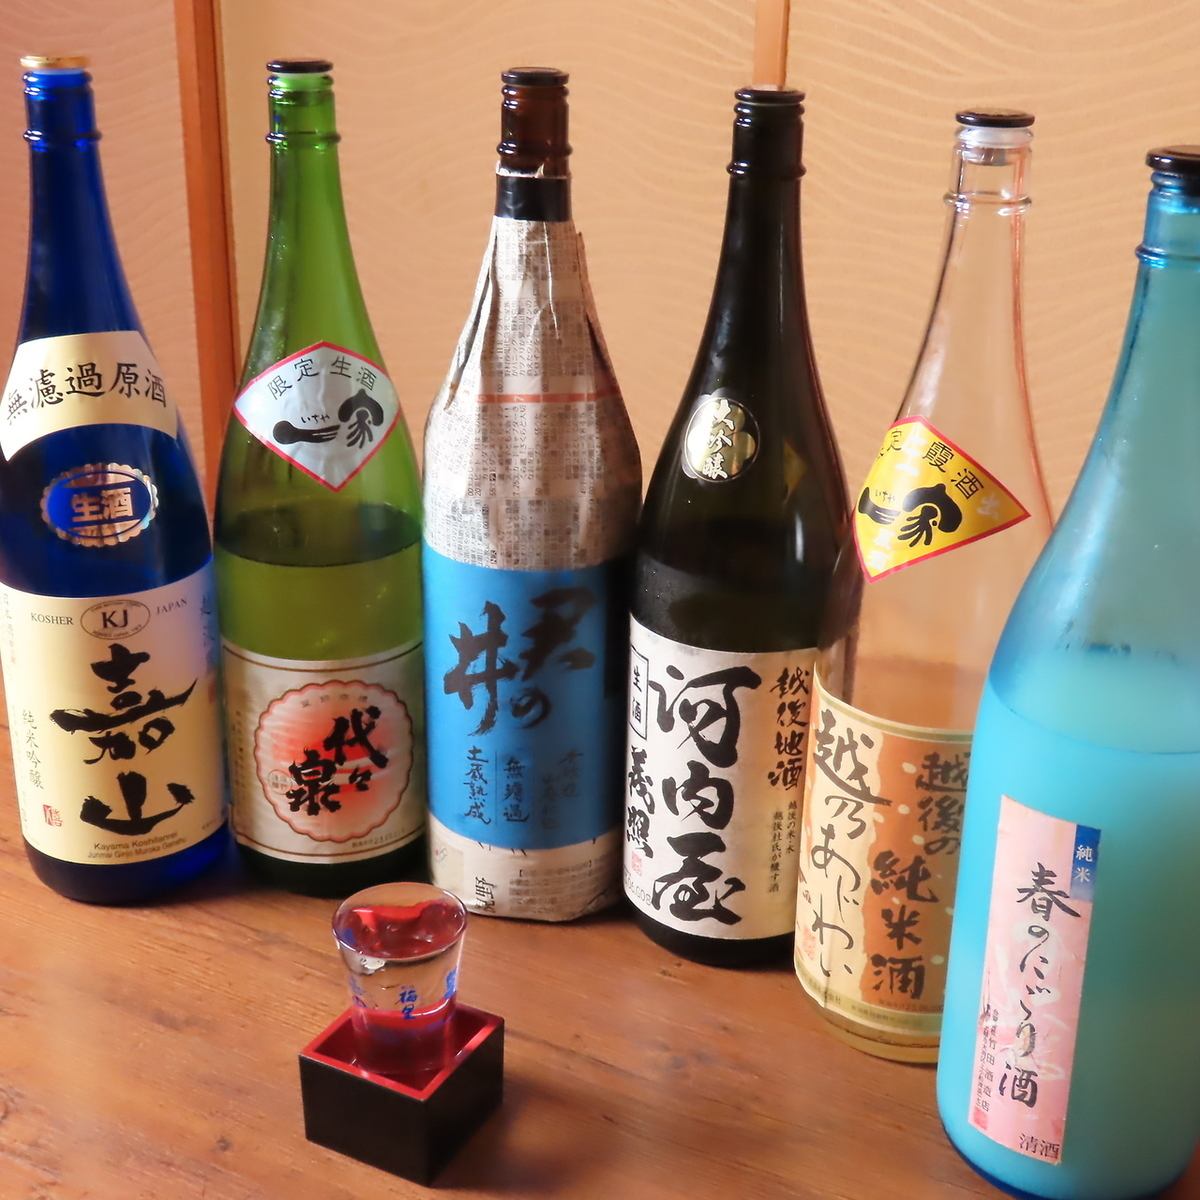 Speaking of fish dishes, Japanese sake.About 30 kinds of local Niigata sake are always available.